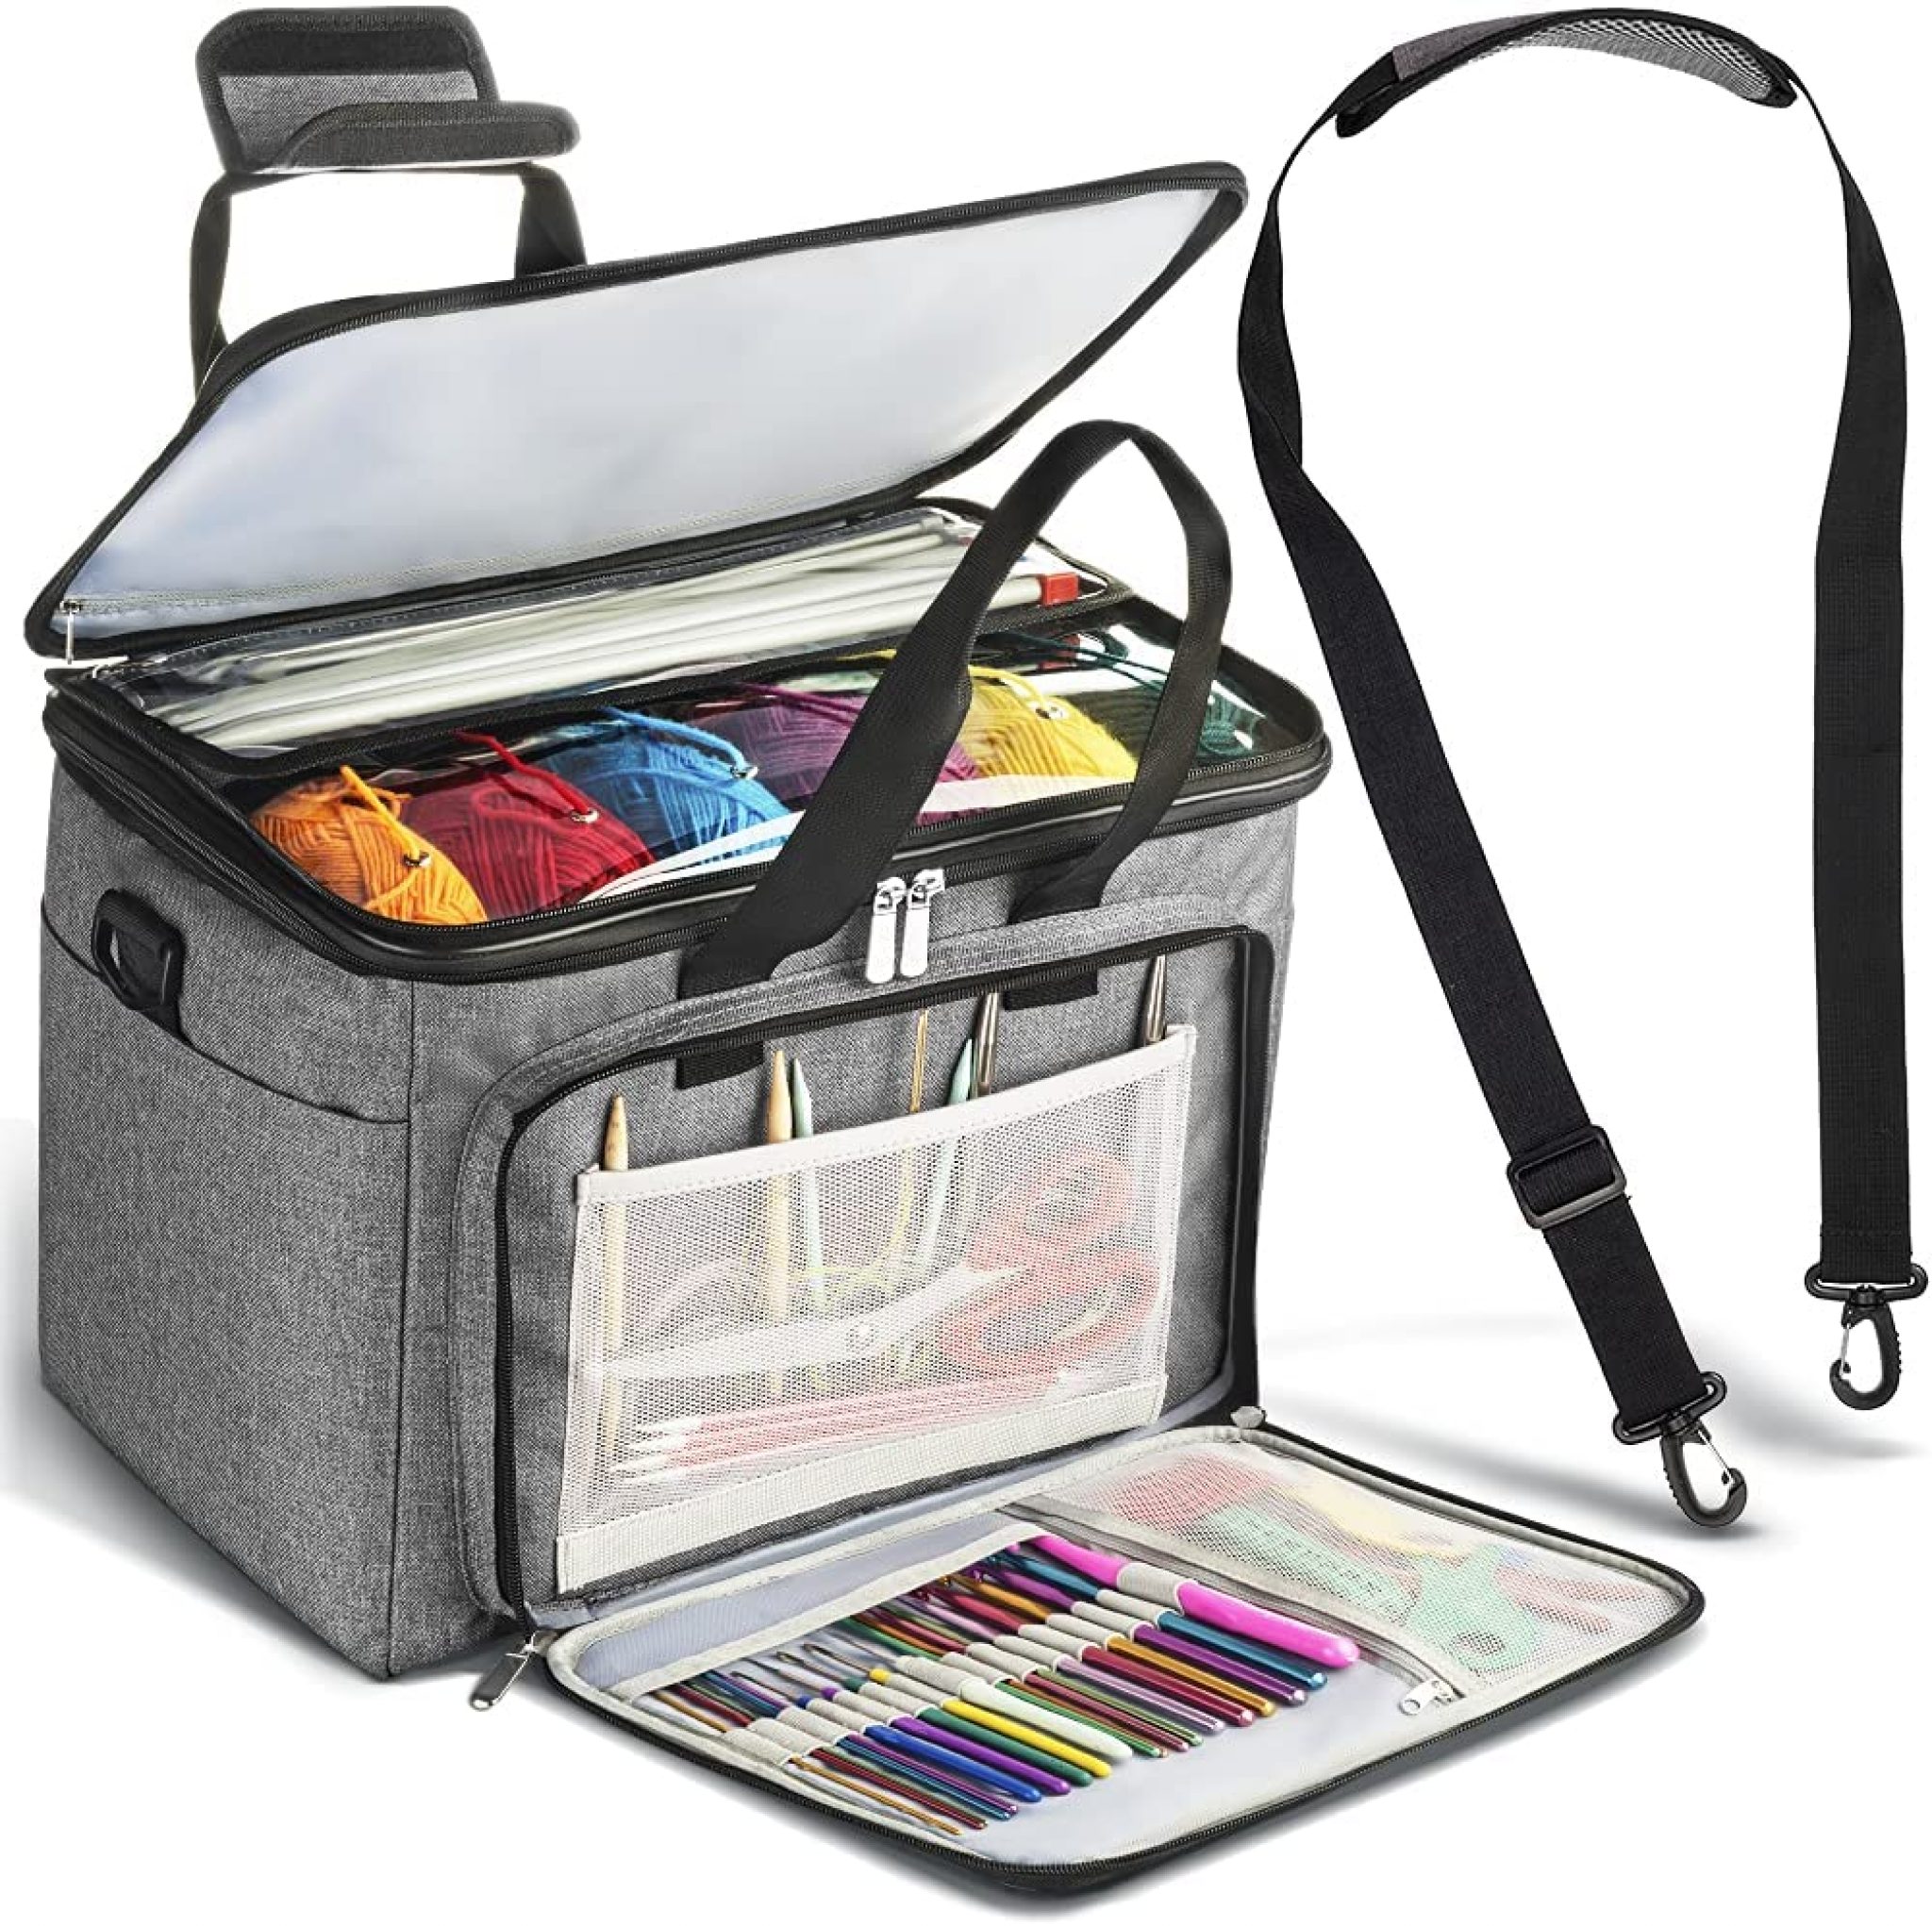 Large Craft Carrying Bag HUGE Discount with Code!